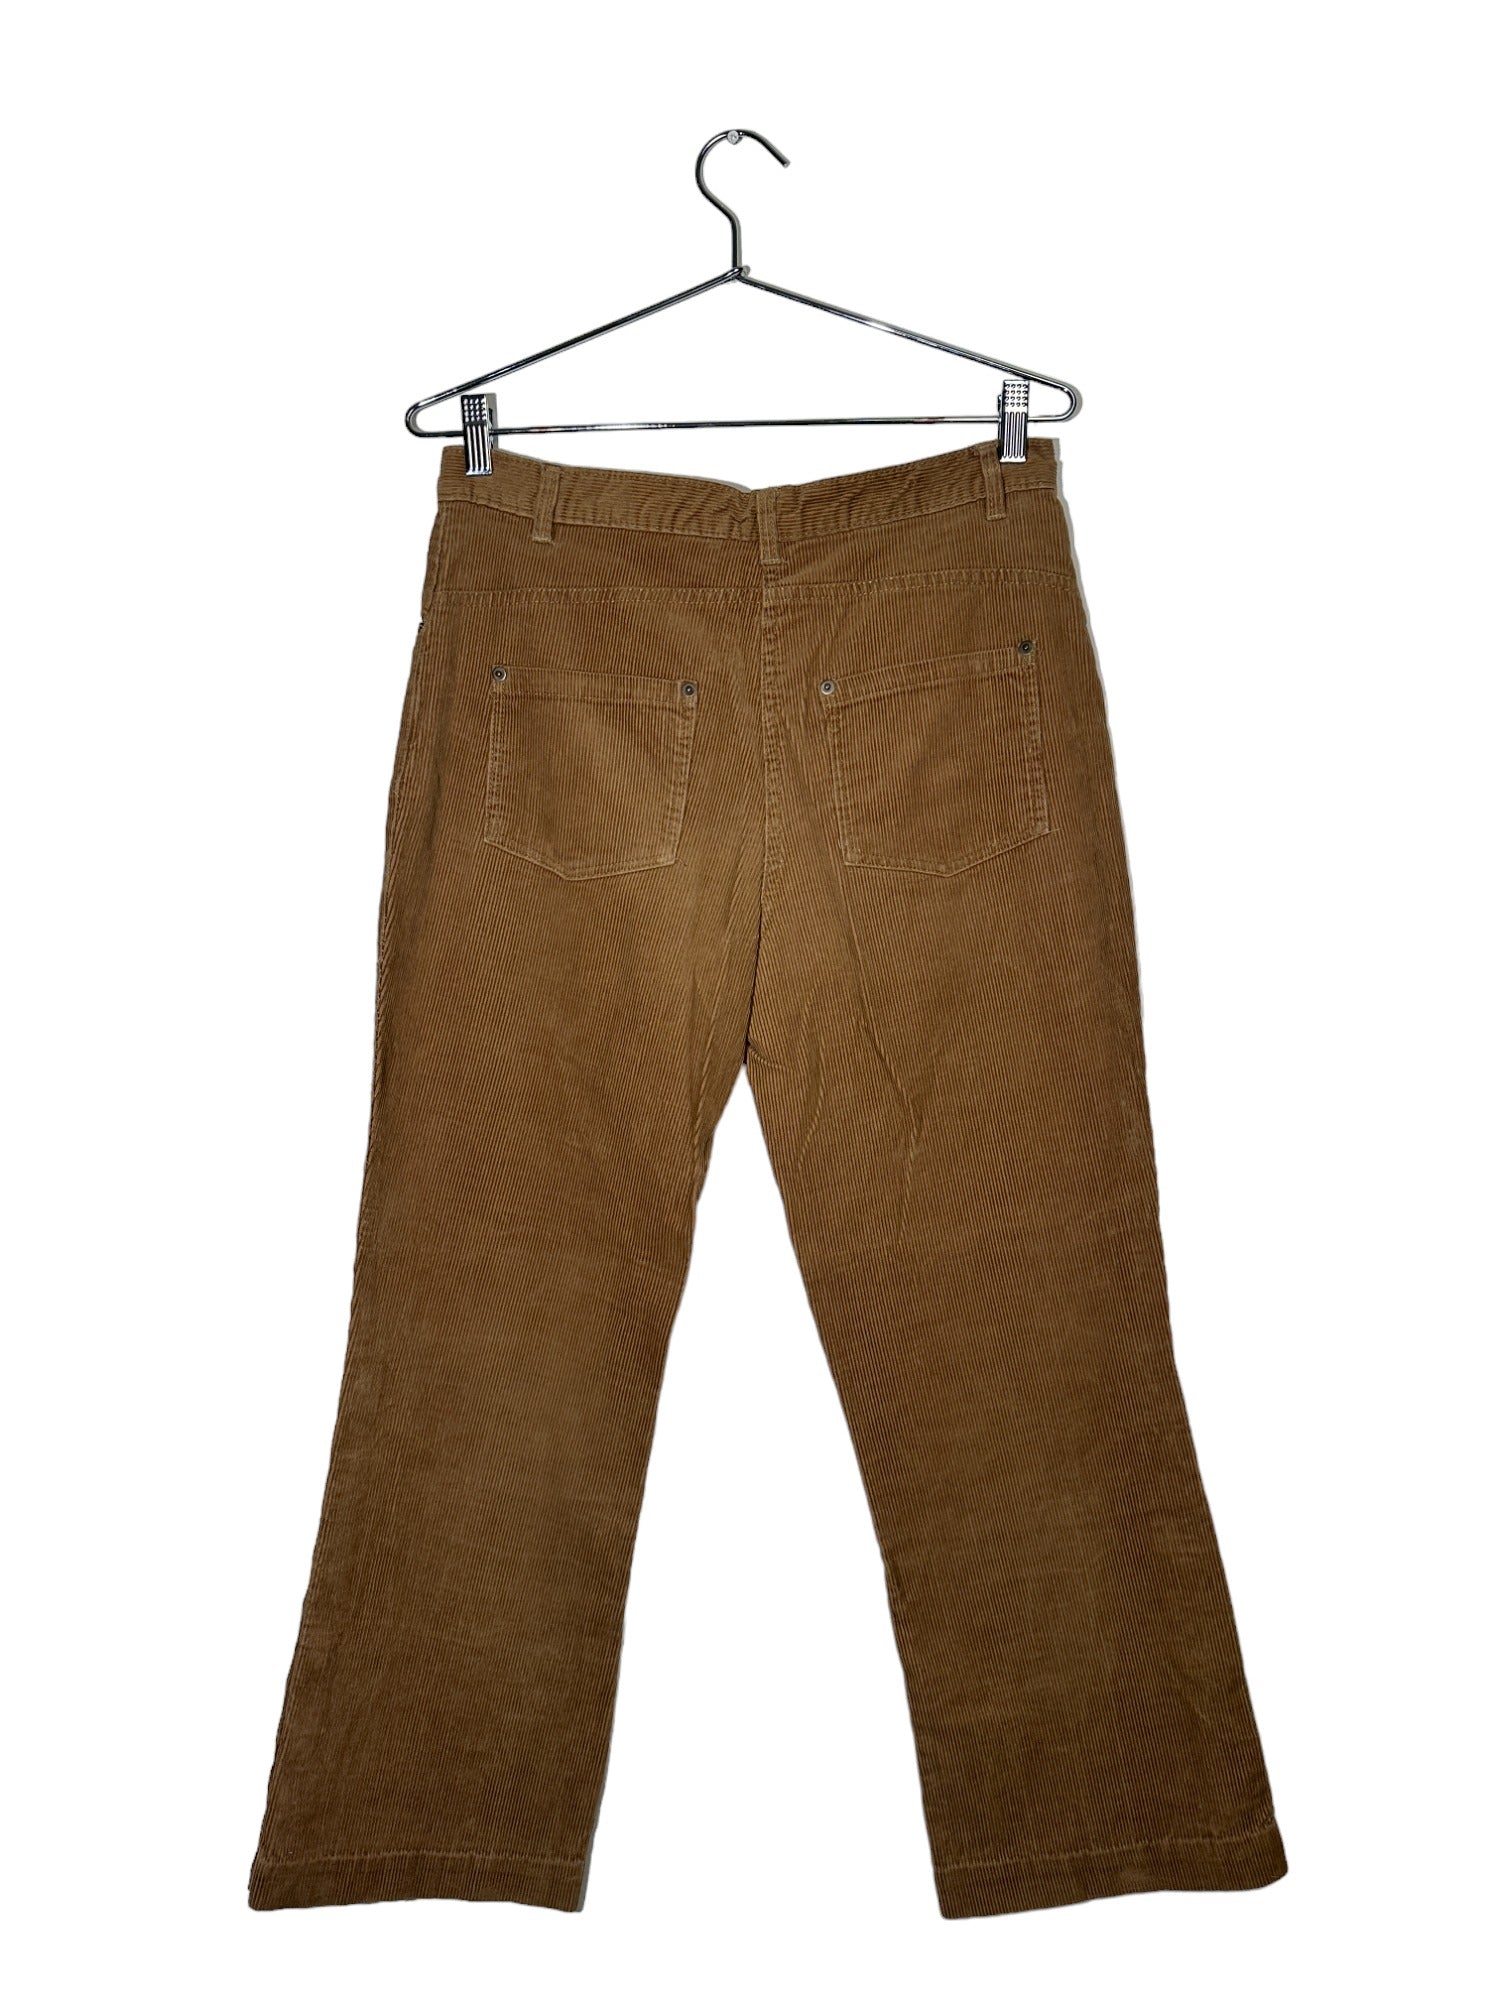 Brown Corduroy Jeans with Buttoned Slit